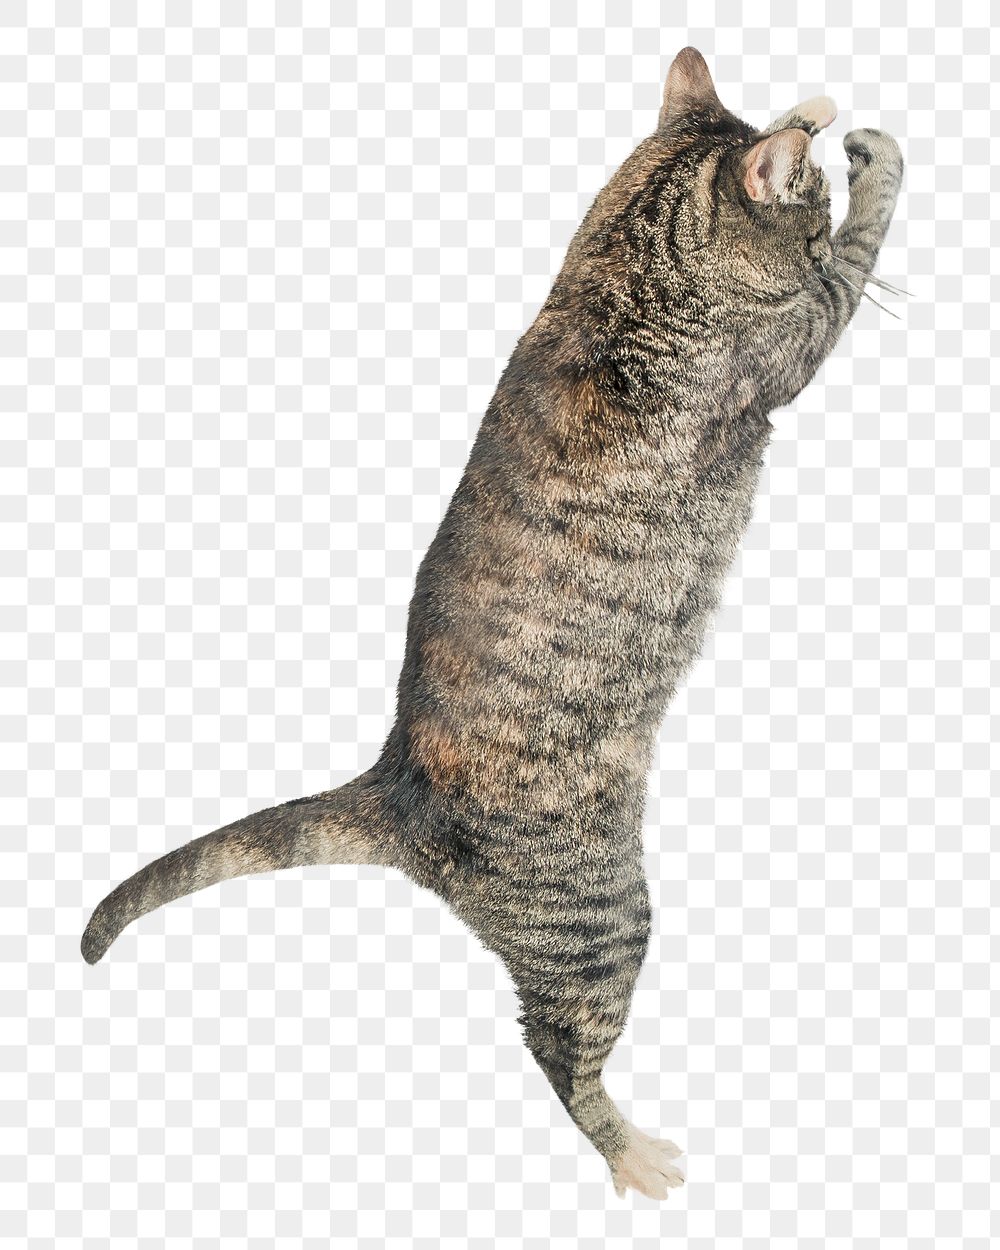 Cat jumping png sticker, transparent background